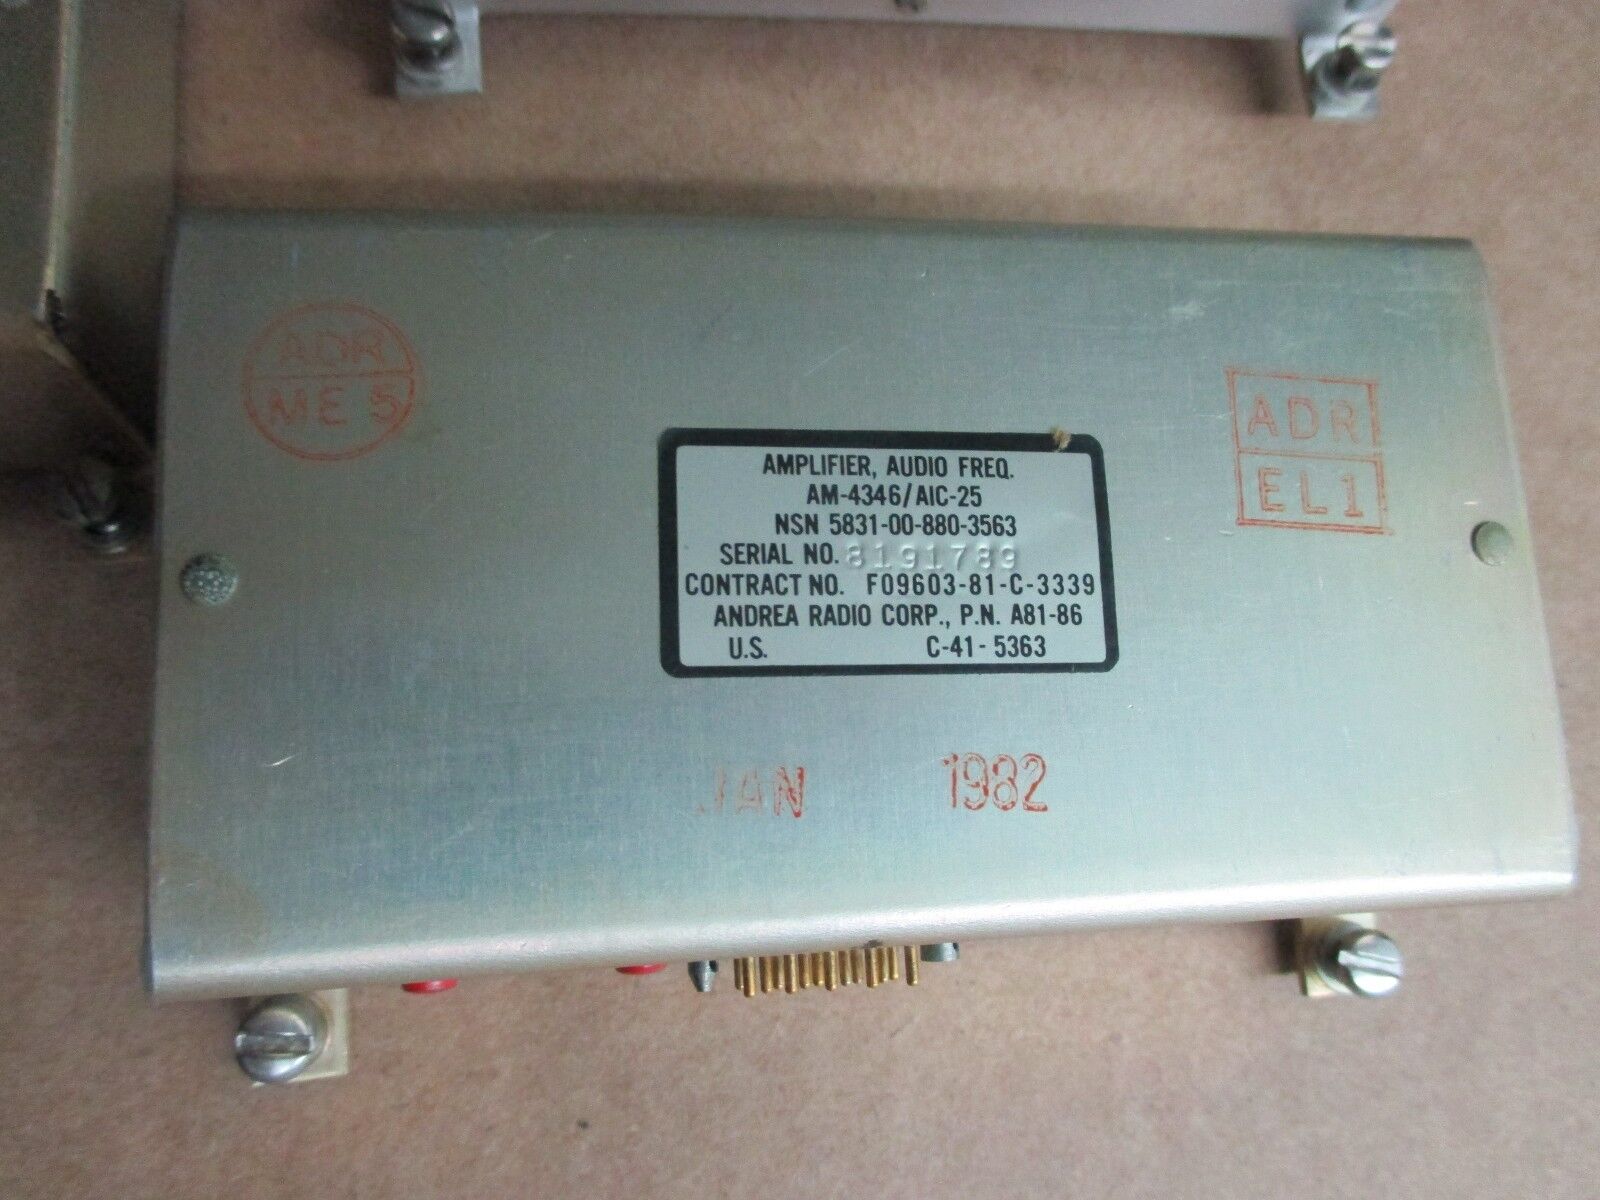 AMPLIFIER AUDIO FREQUENCY MFR ANDREA RADIO CORP. *P/N AM4346AIC25* ALT: A81-86